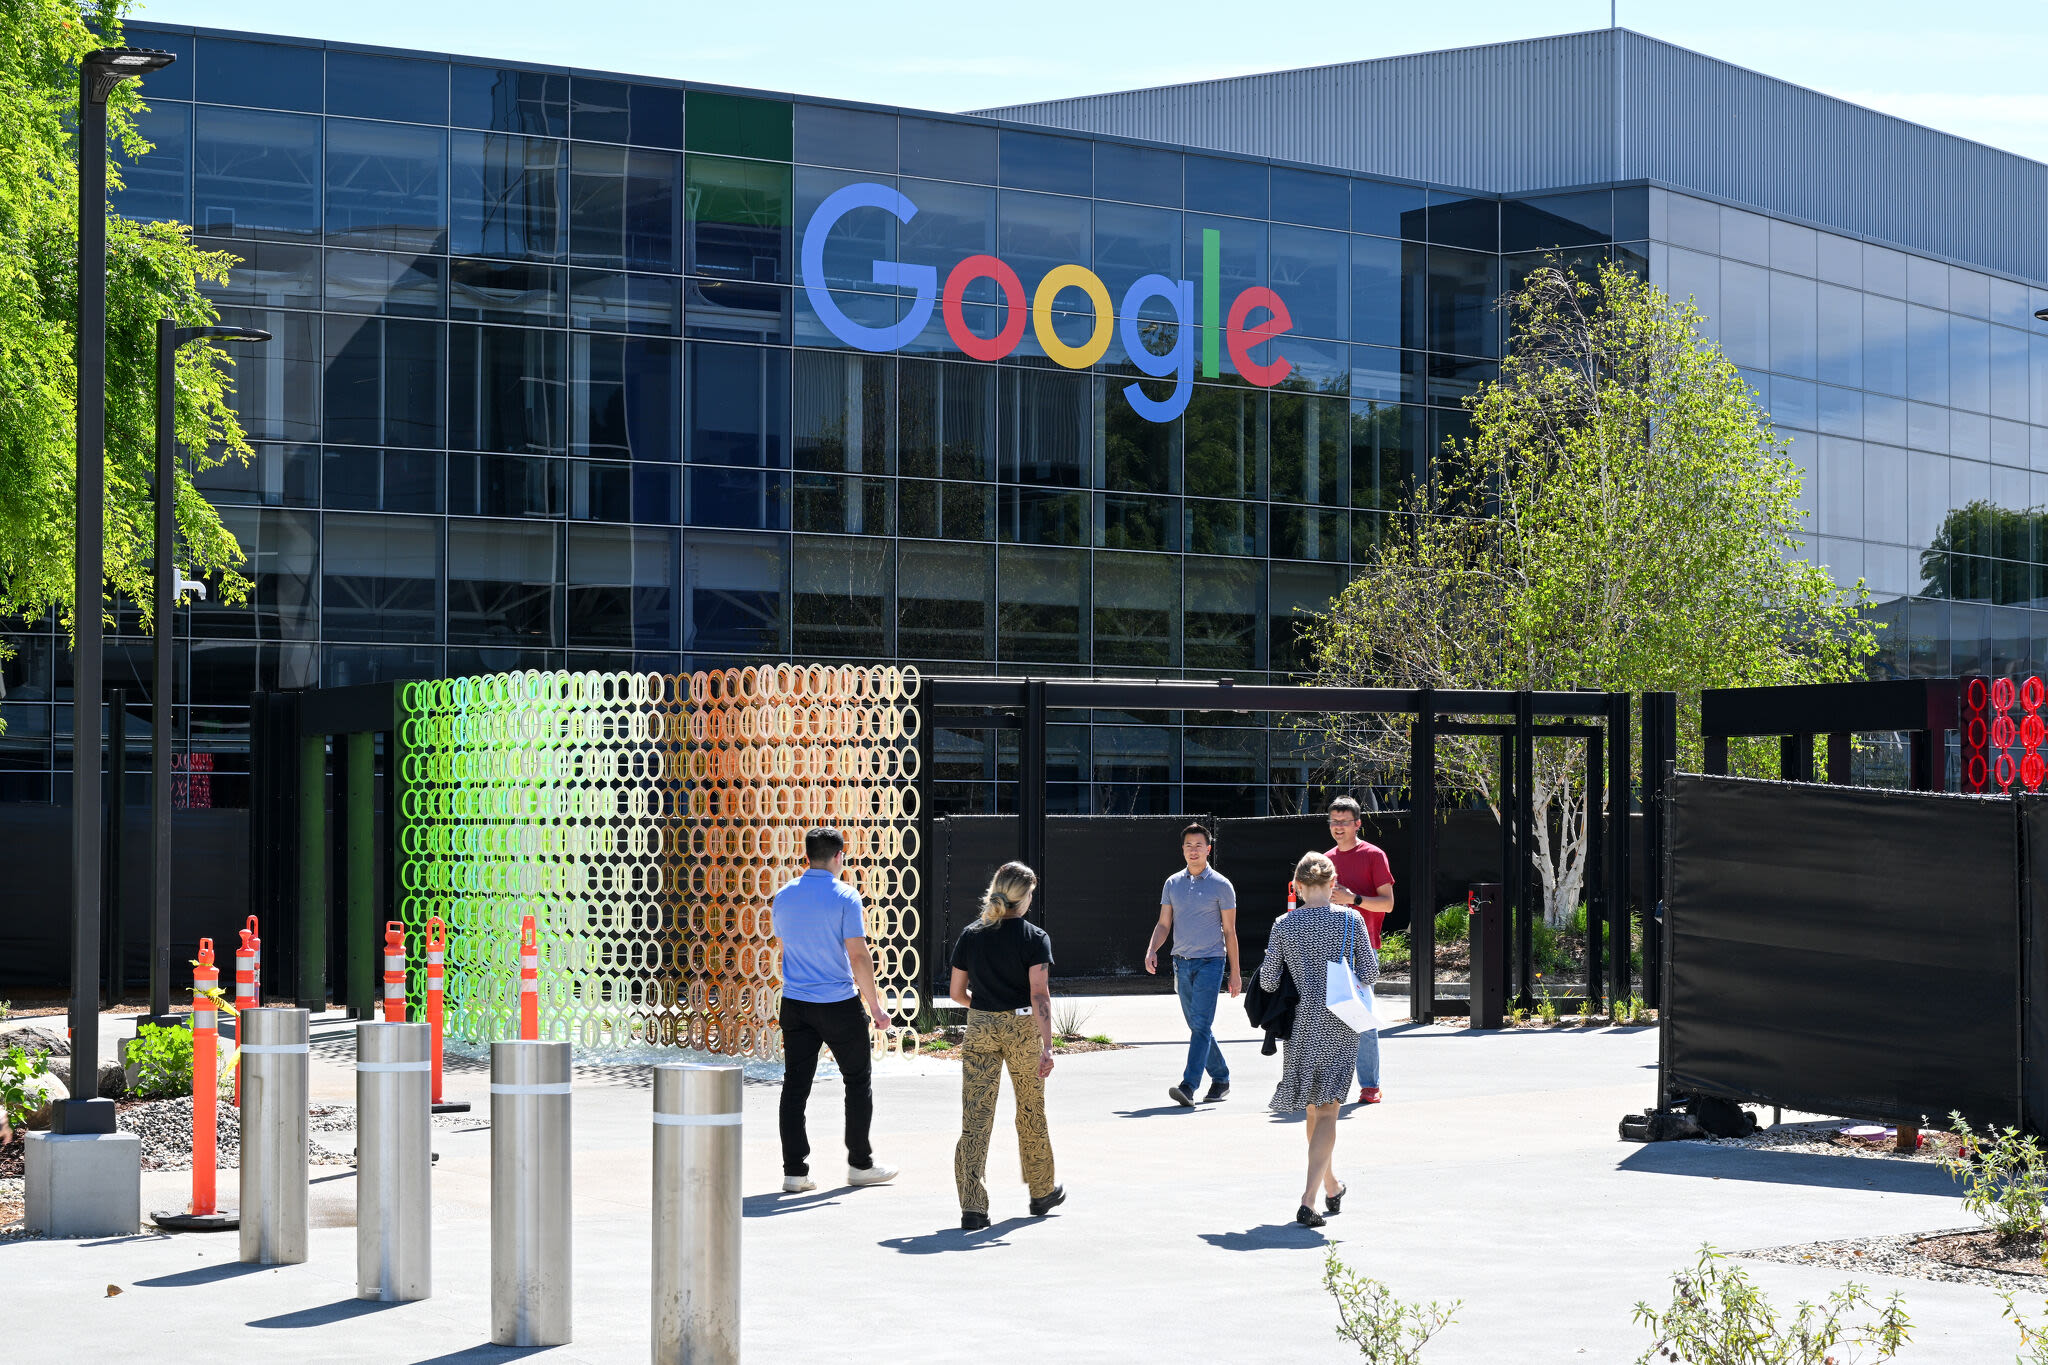 Google targeted some layoffs at 'disloyal' workers, lawsuit says